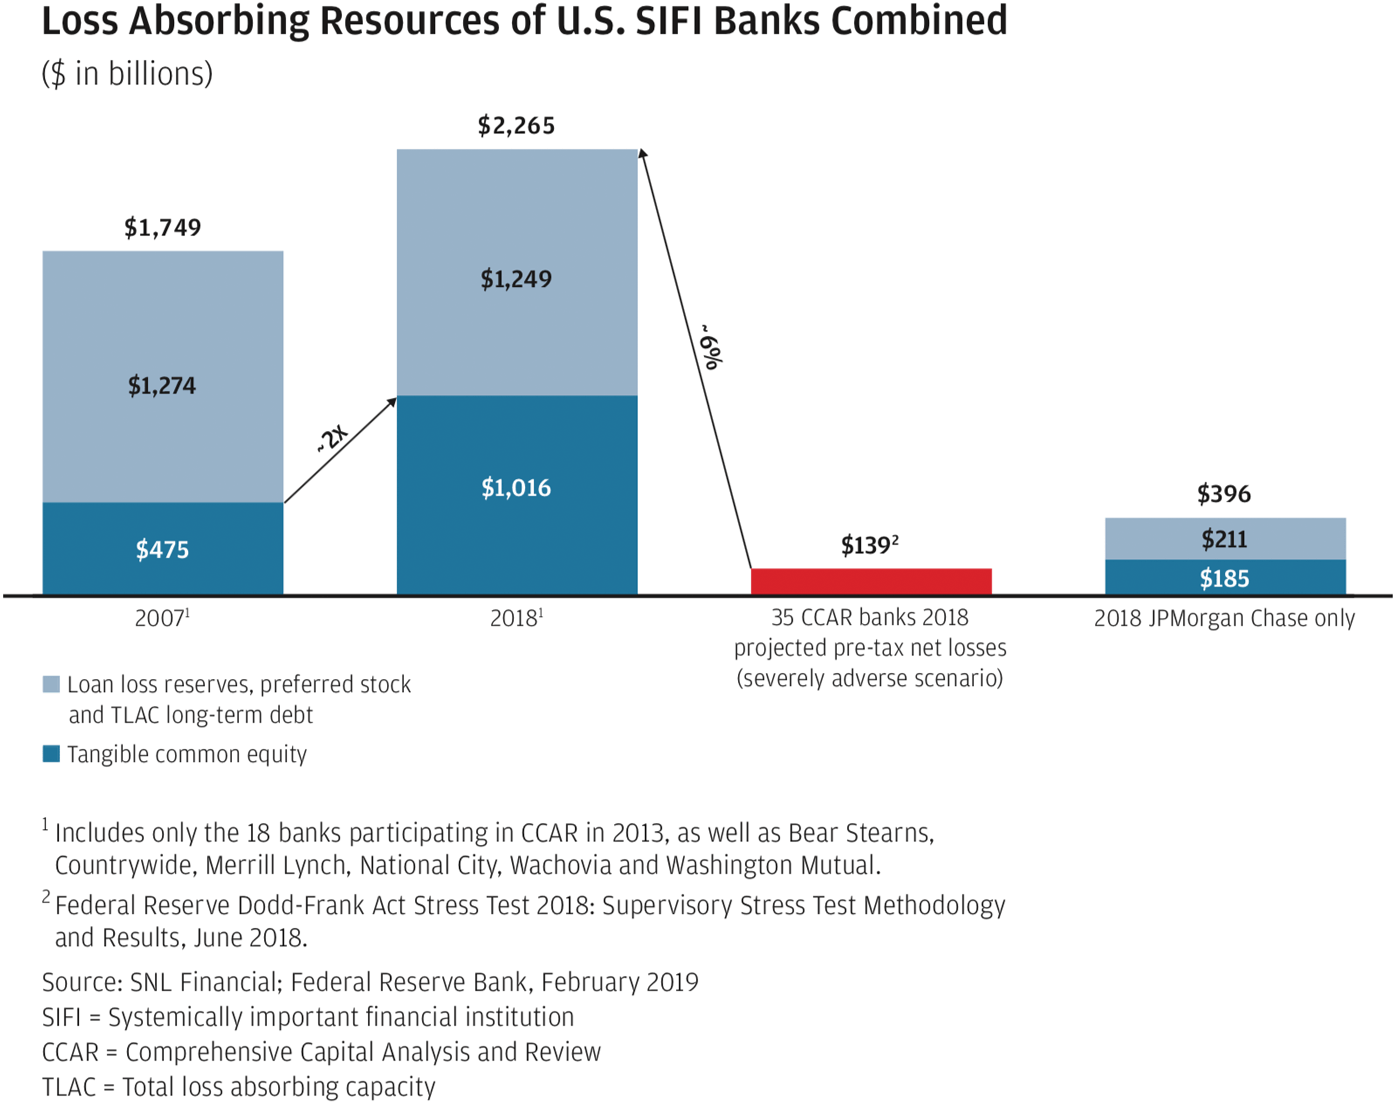 Loss Absorbing Resources of U.S. SIFI Banks Combined graph